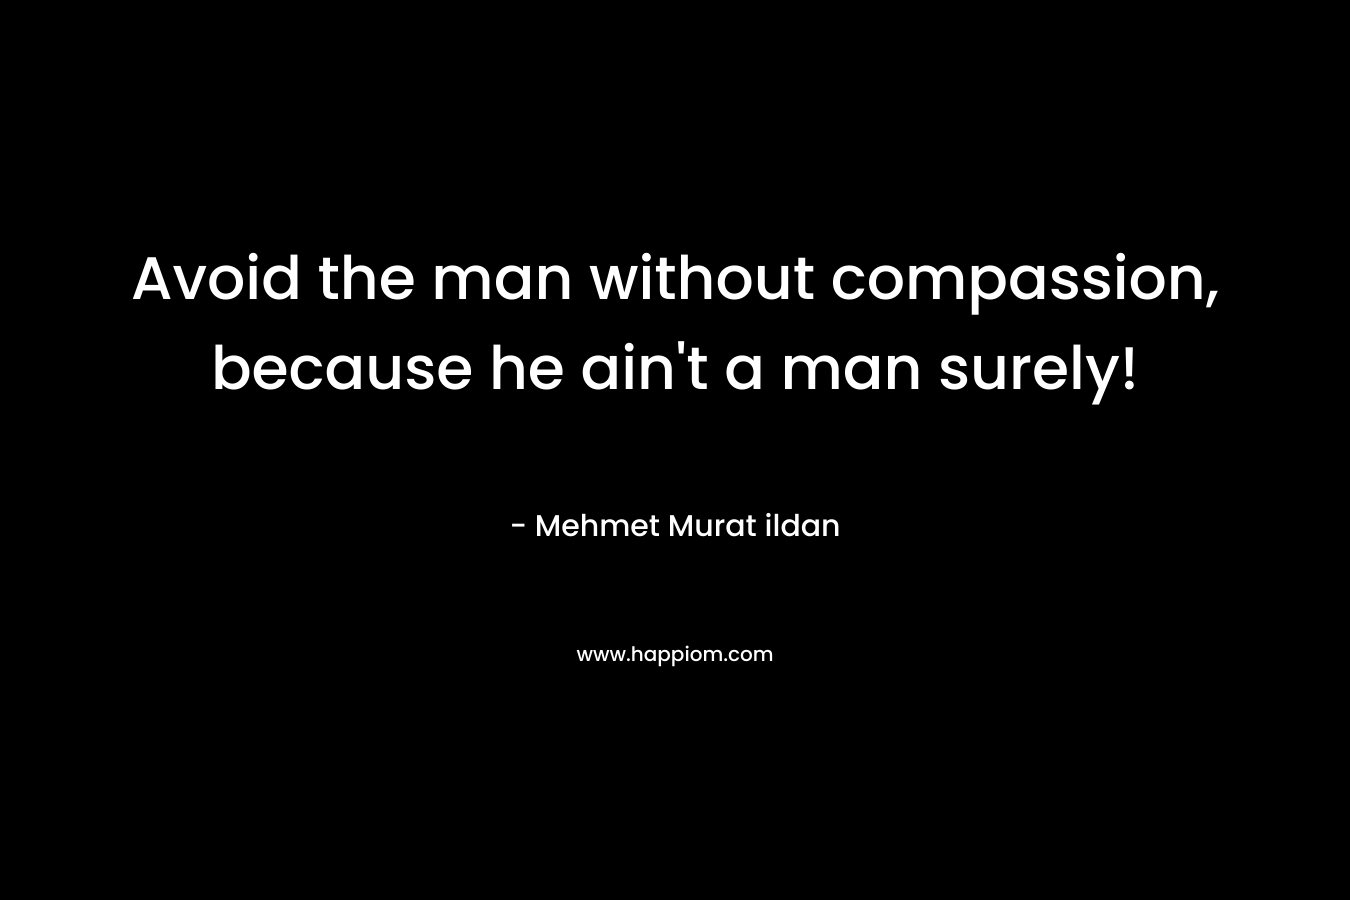 Avoid the man without compassion, because he ain't a man surely!